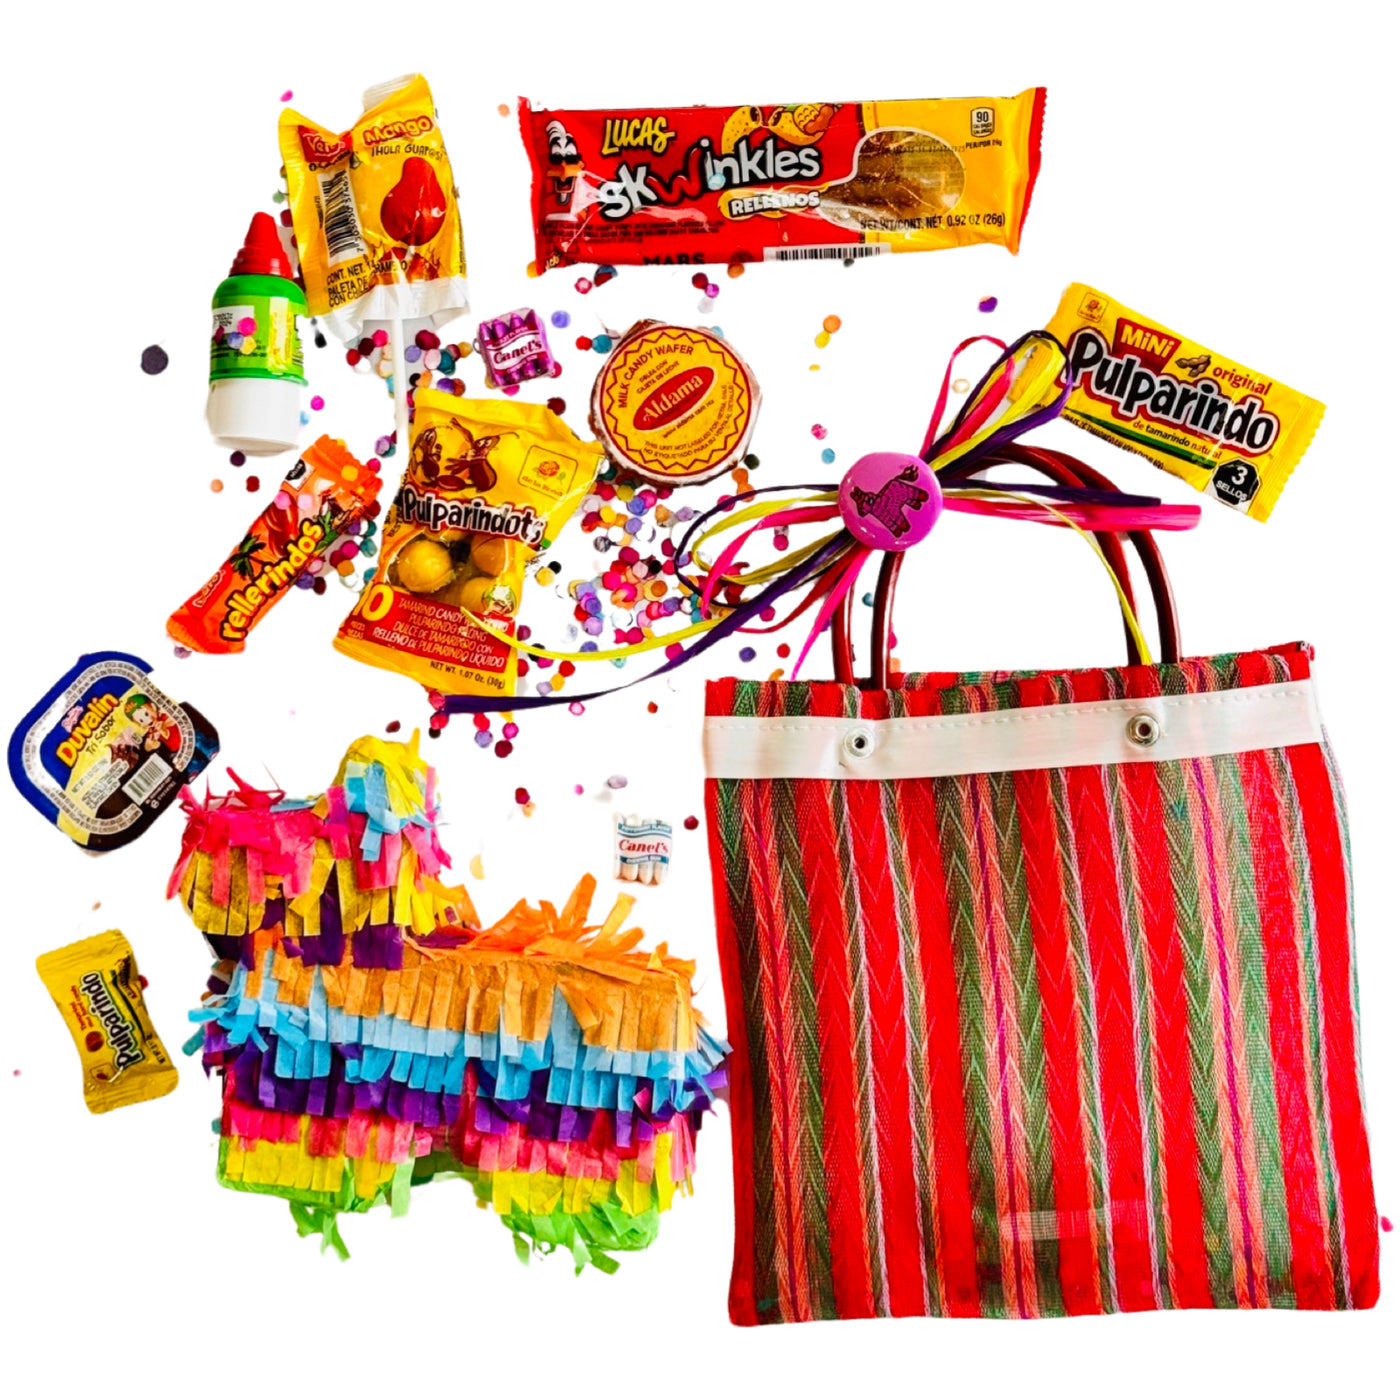 colorful Mexican mercado bag filled iwth candy, a coloful donkey piñata with three pieces of candy and confetti.